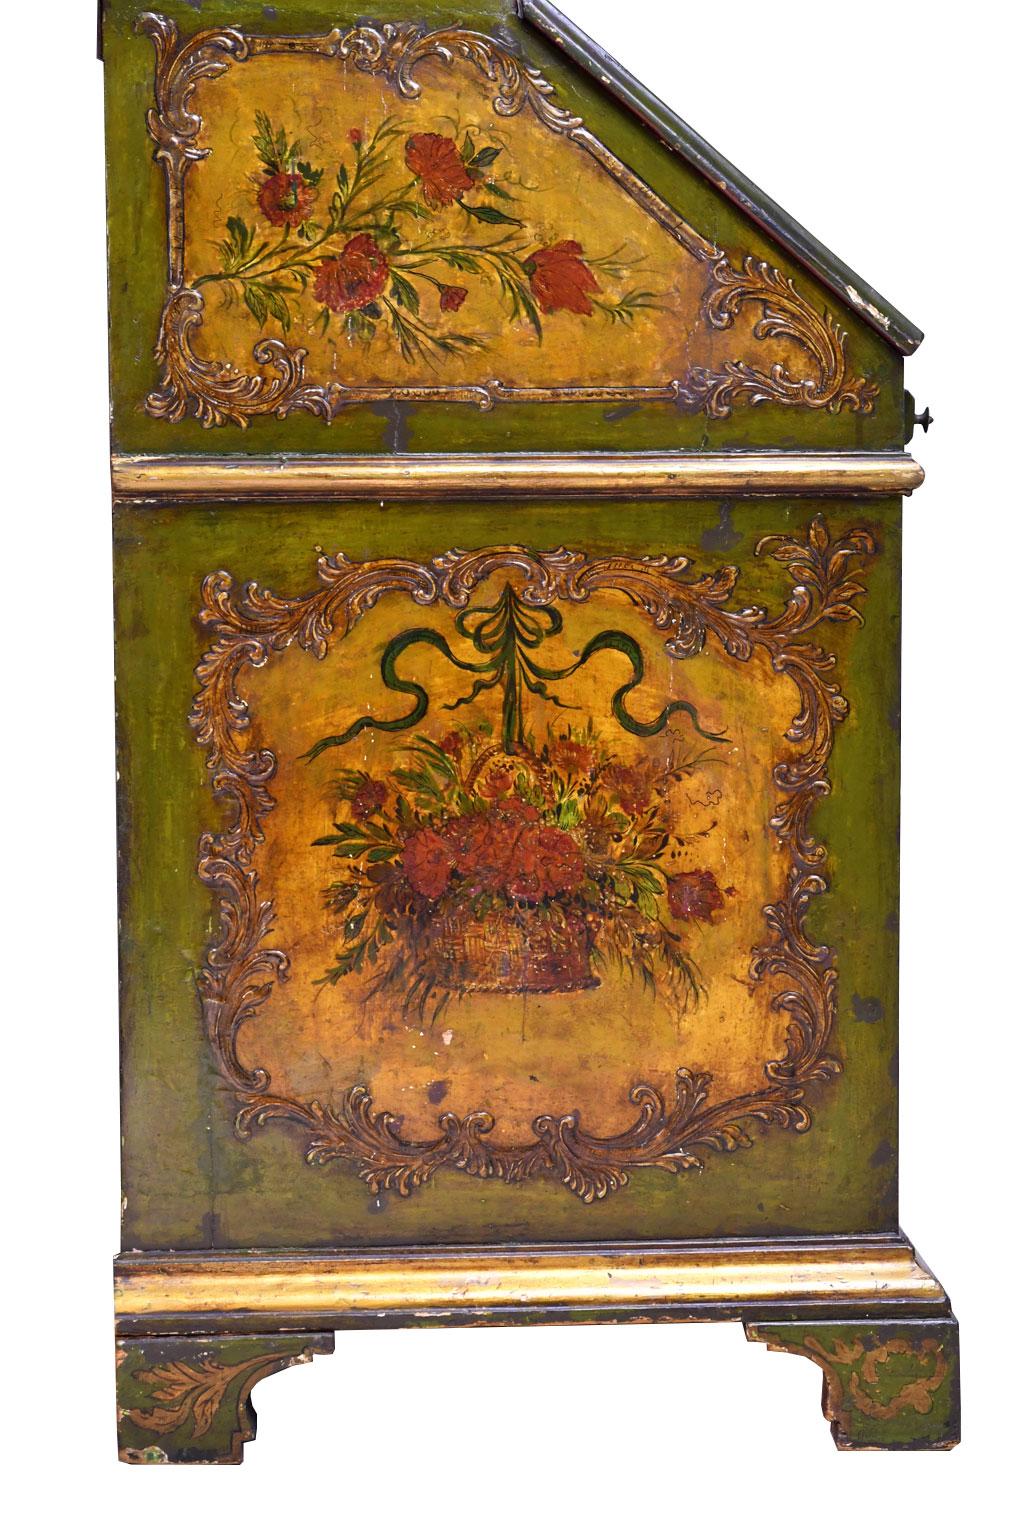 19th Century Venetian Secretary Bookcase with Painted Scenes and Floral Sprays For Sale 10